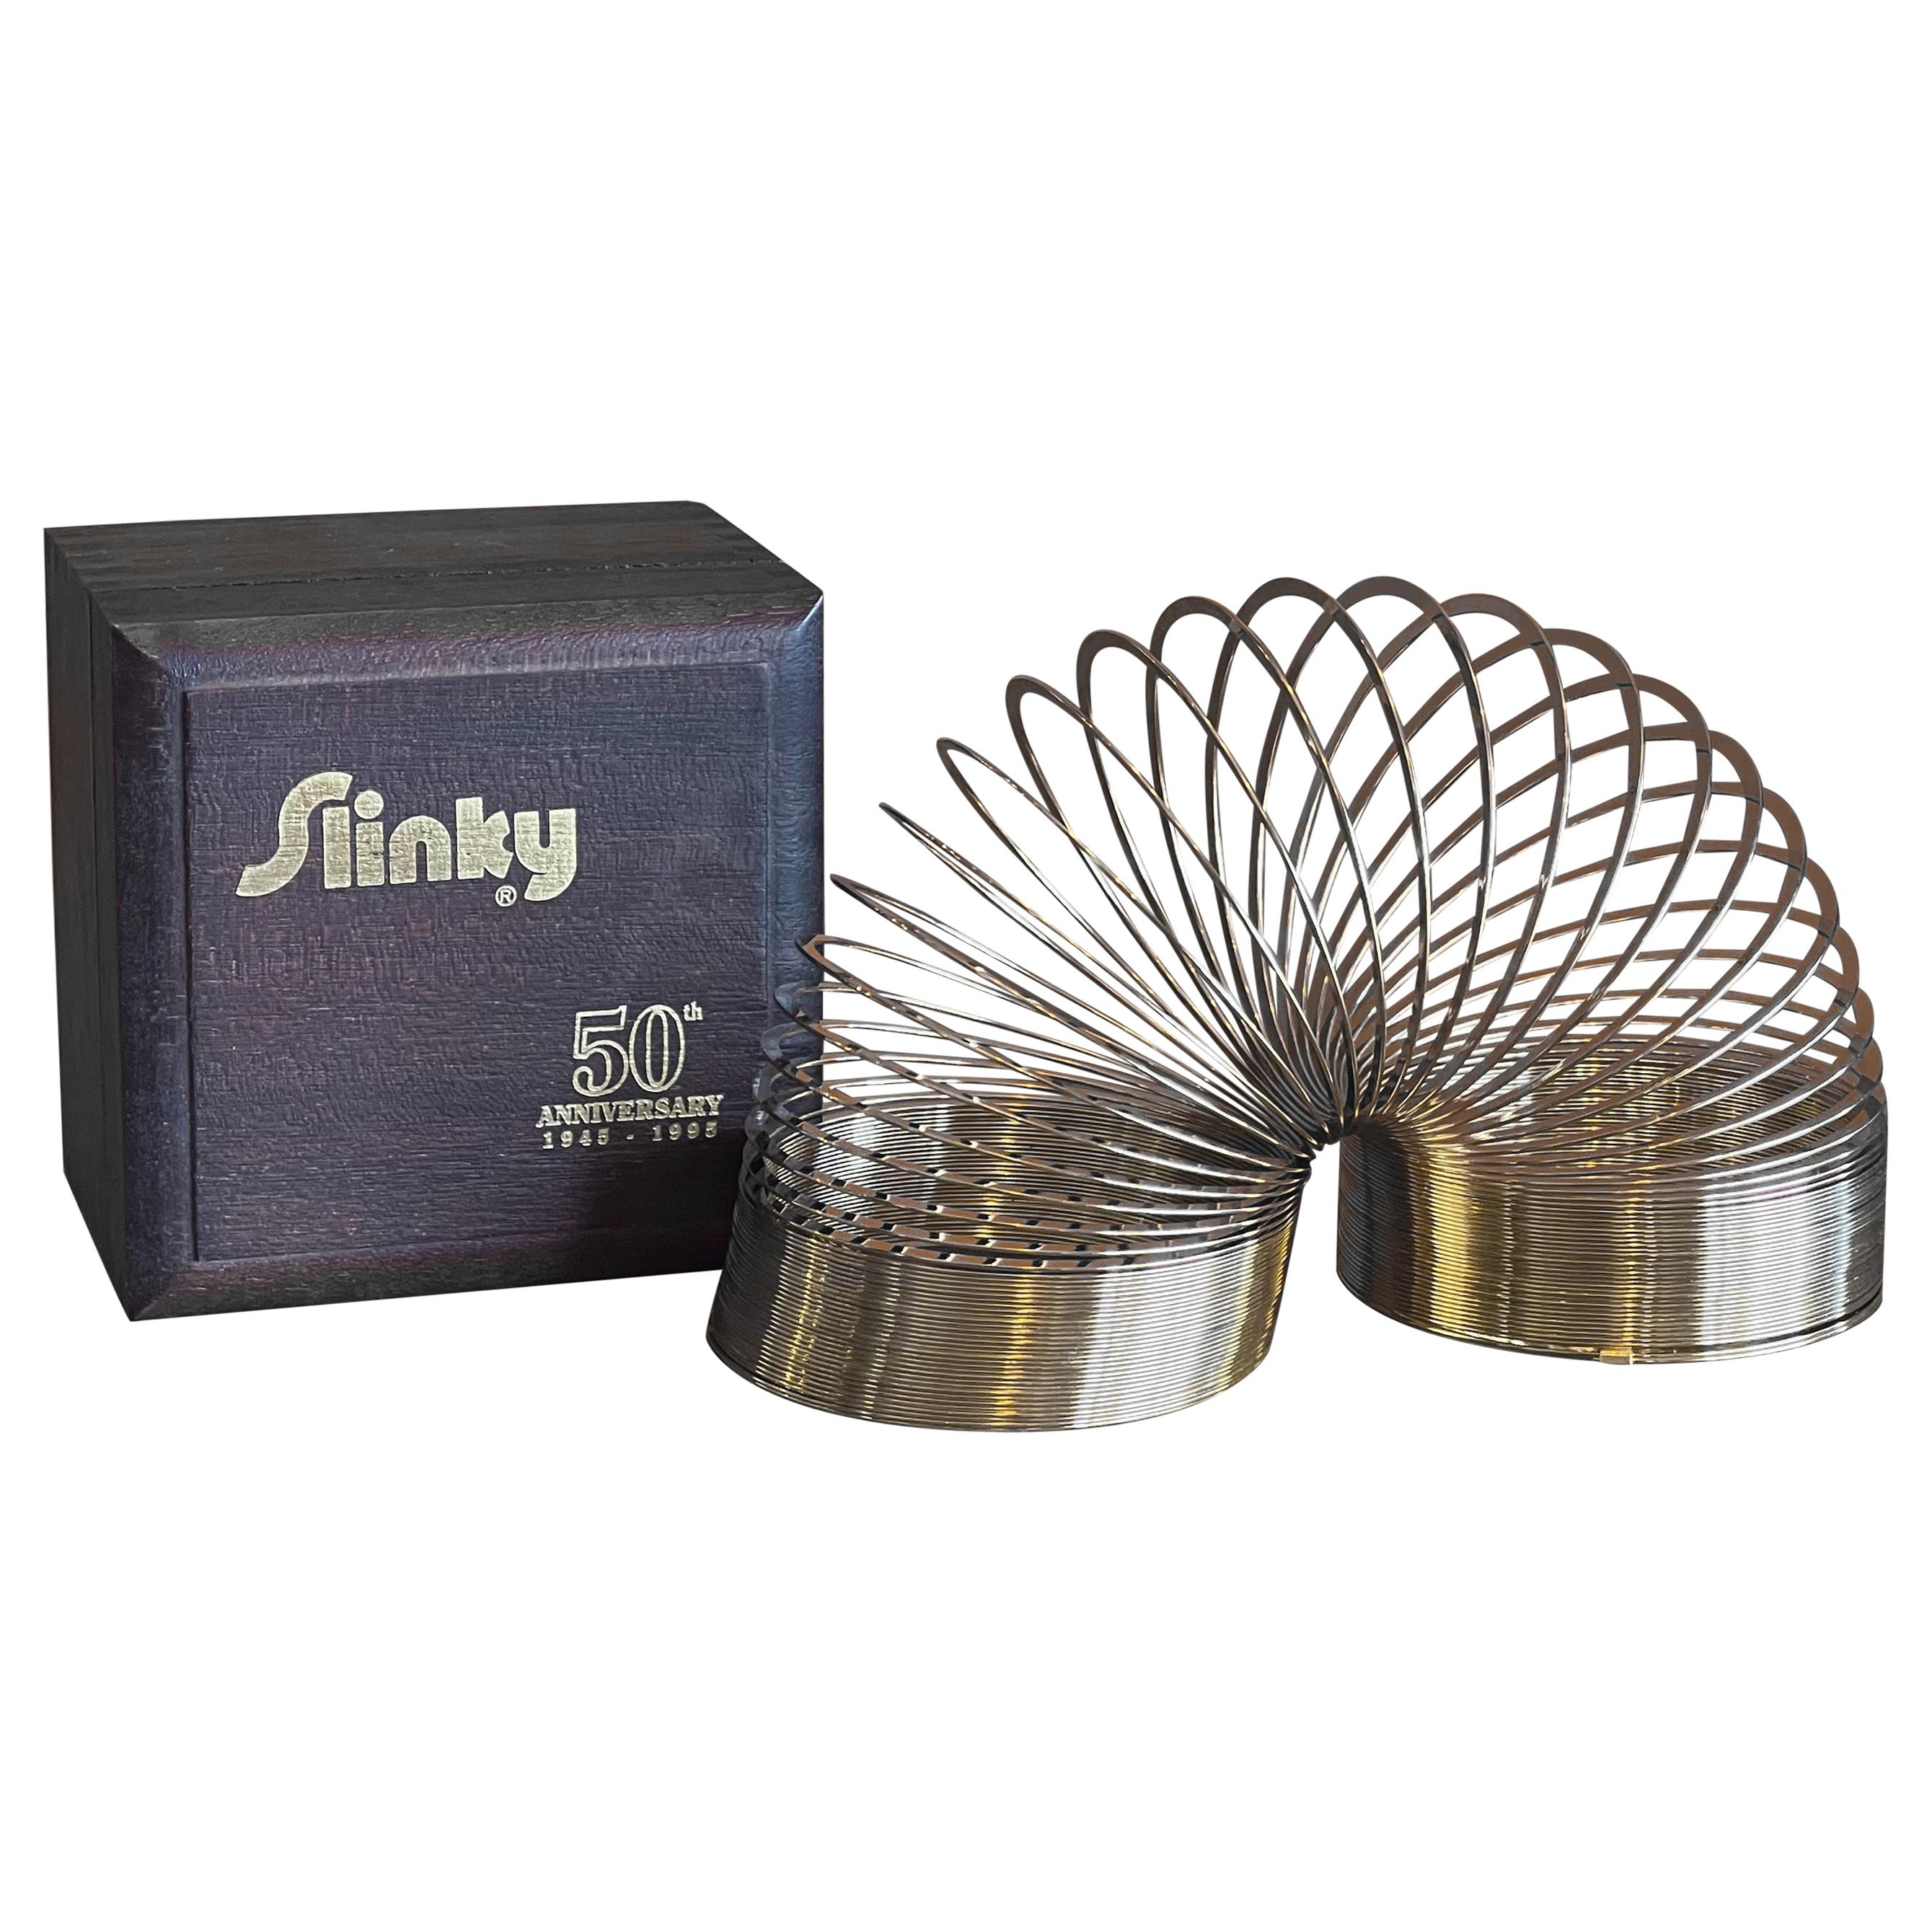 50th Anniversary Gold-Plated Slinky Toy in Wood Box